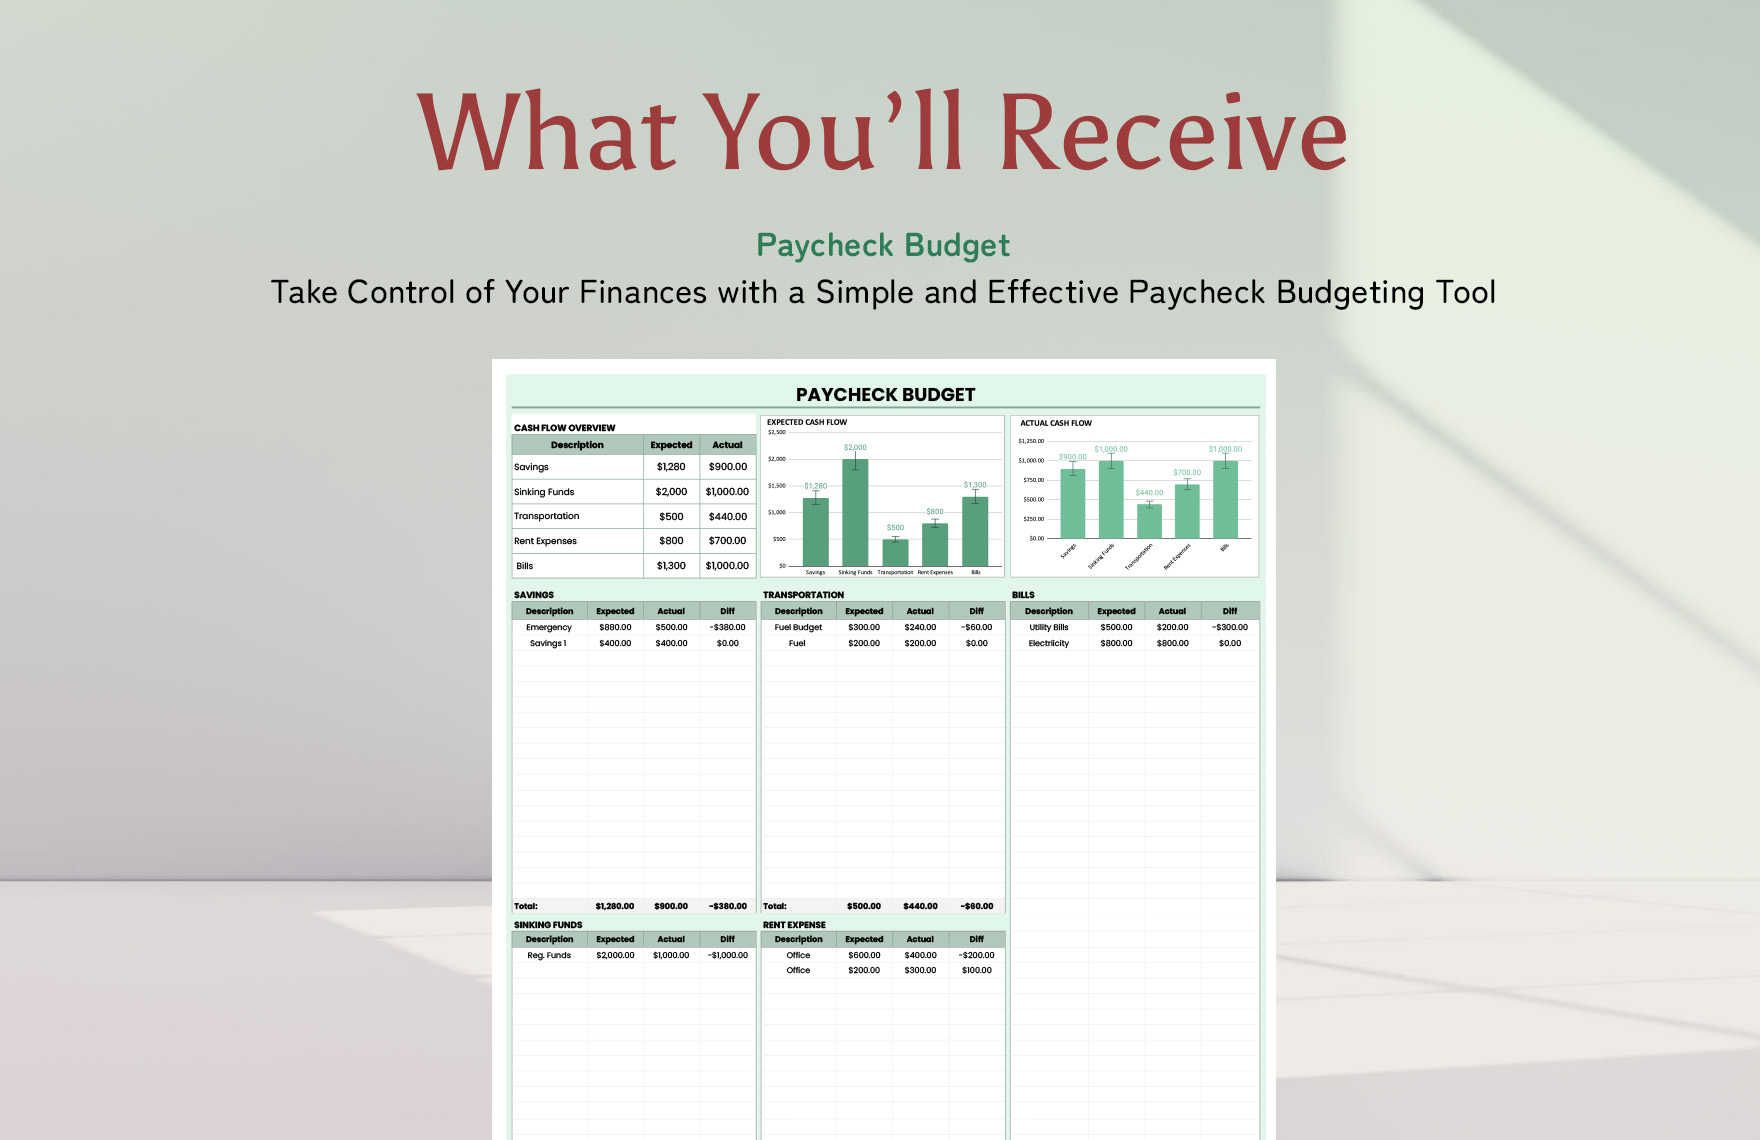 Paycheck  Budget  Template